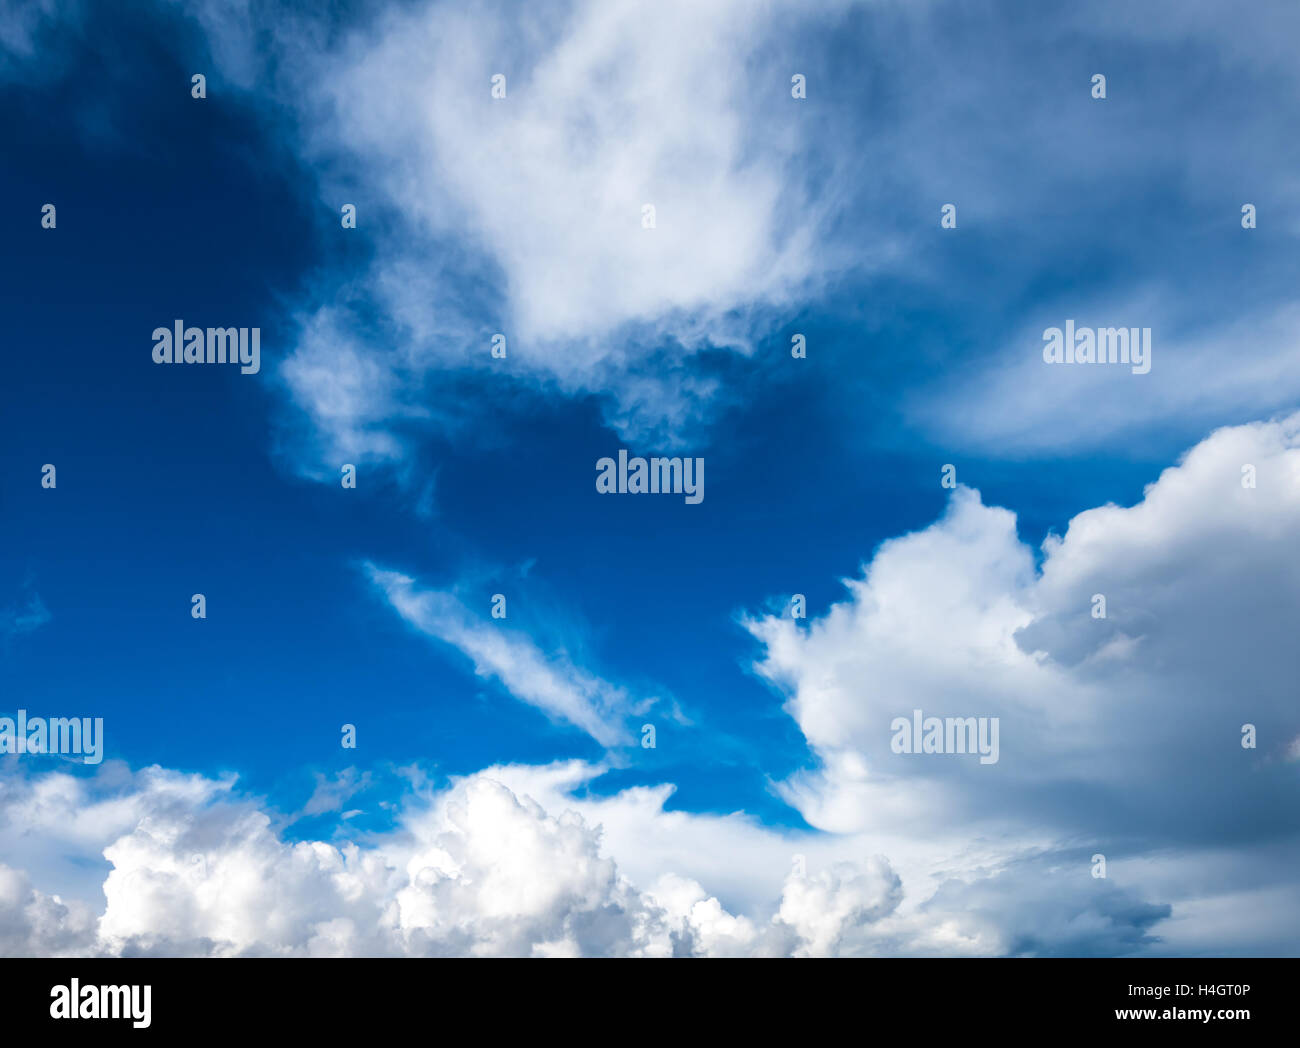 Cloudy sky background Stock Photo